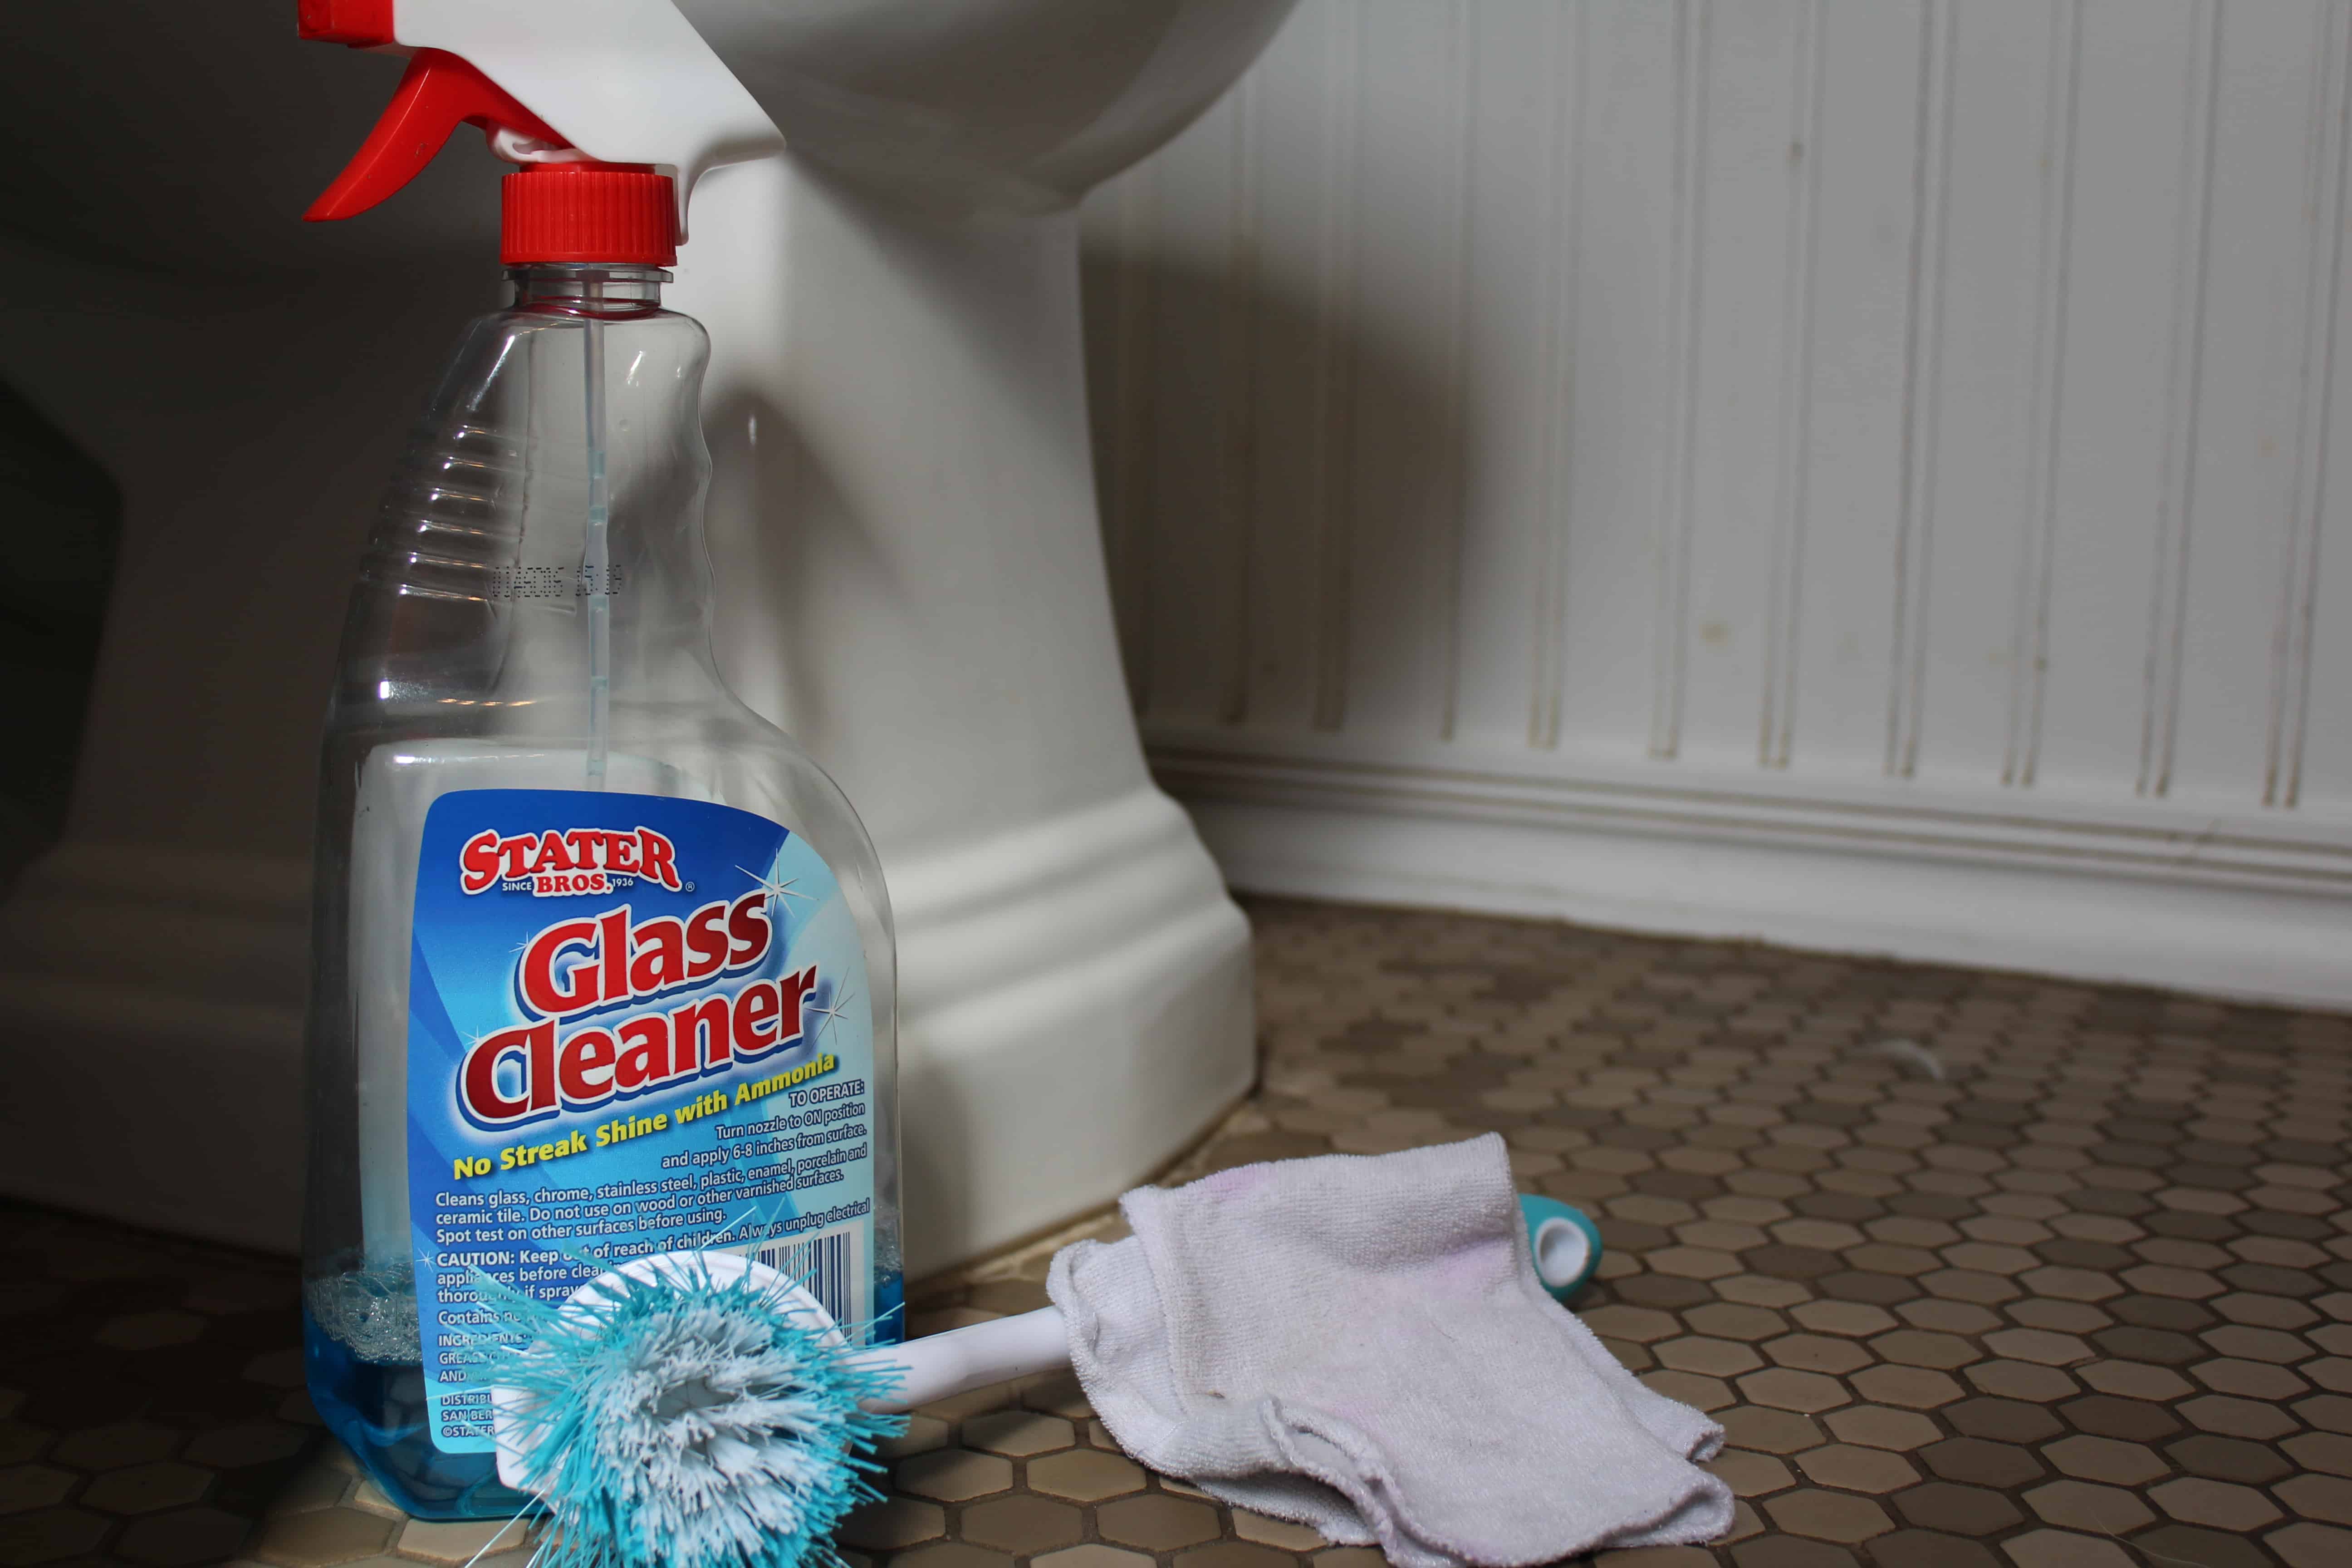 A spray bottle of glass cleaner, a toilet brush with cleaning rags next to a very clean toilet